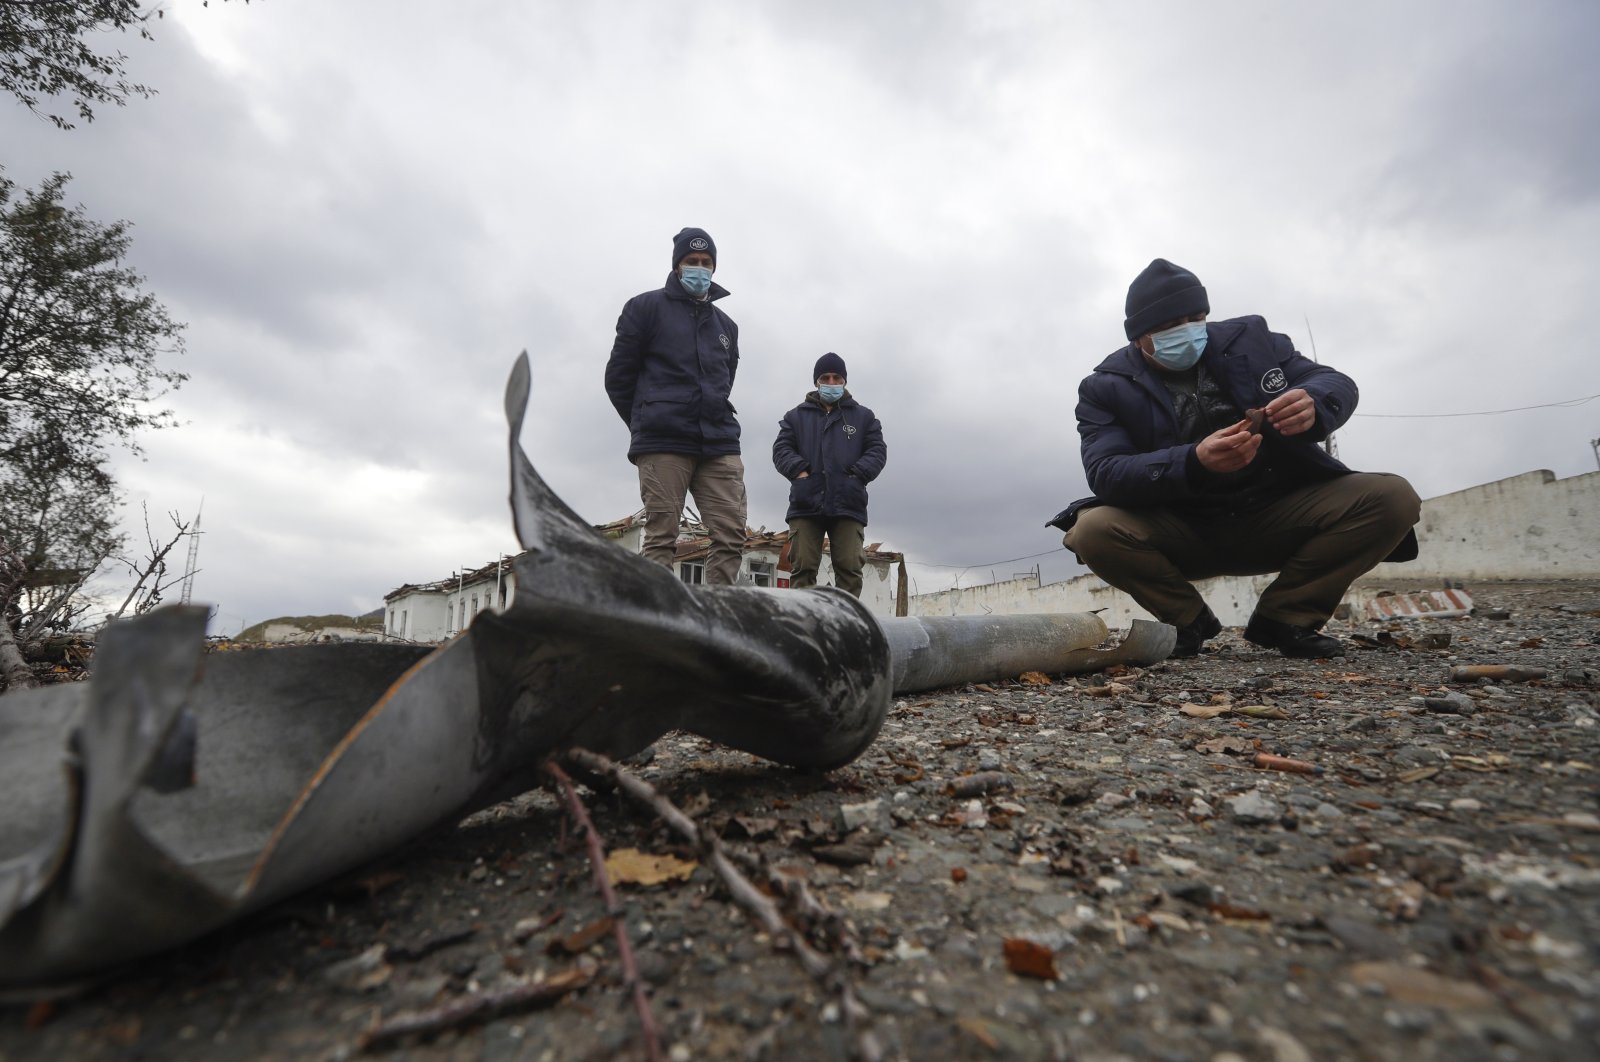 Members of the survey team from Halo Trust mine-clearing organisation examines unexploded items at an damaged ammunition store near Aeygestan, on the outskirts of Stepanakert, the capital of the separatist region of Nagorno-Karabakh, Nov. 23, 2020.  (AP Photo)